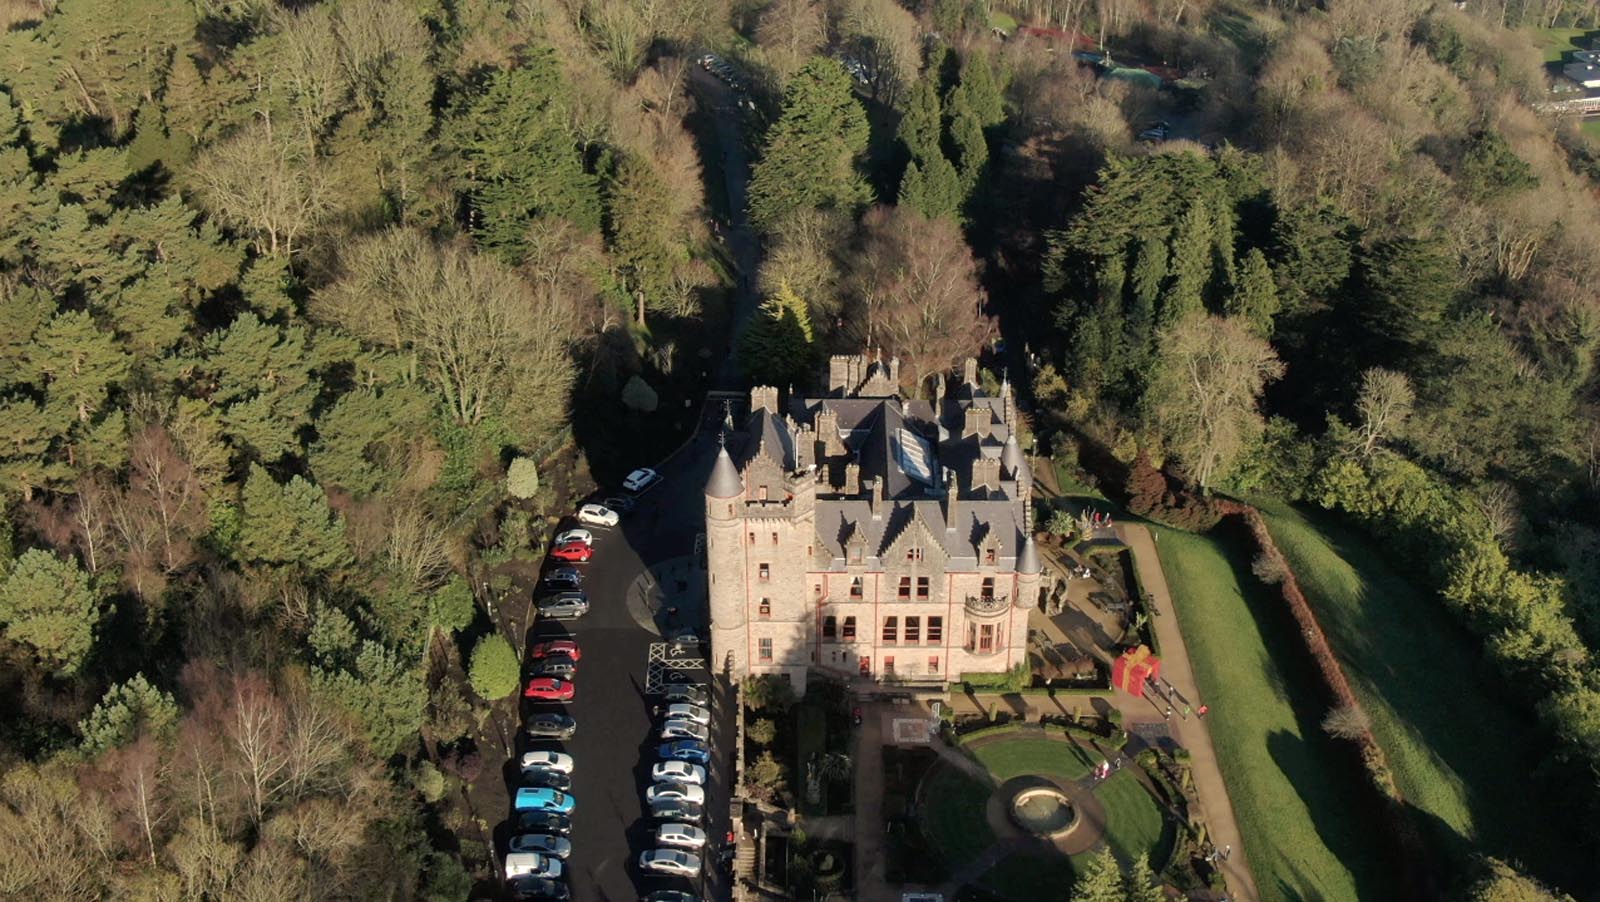 Aerial drone photography and video production services Dublin and Ireland portfolio - screenshot 3 of Belfast Castle 2 video